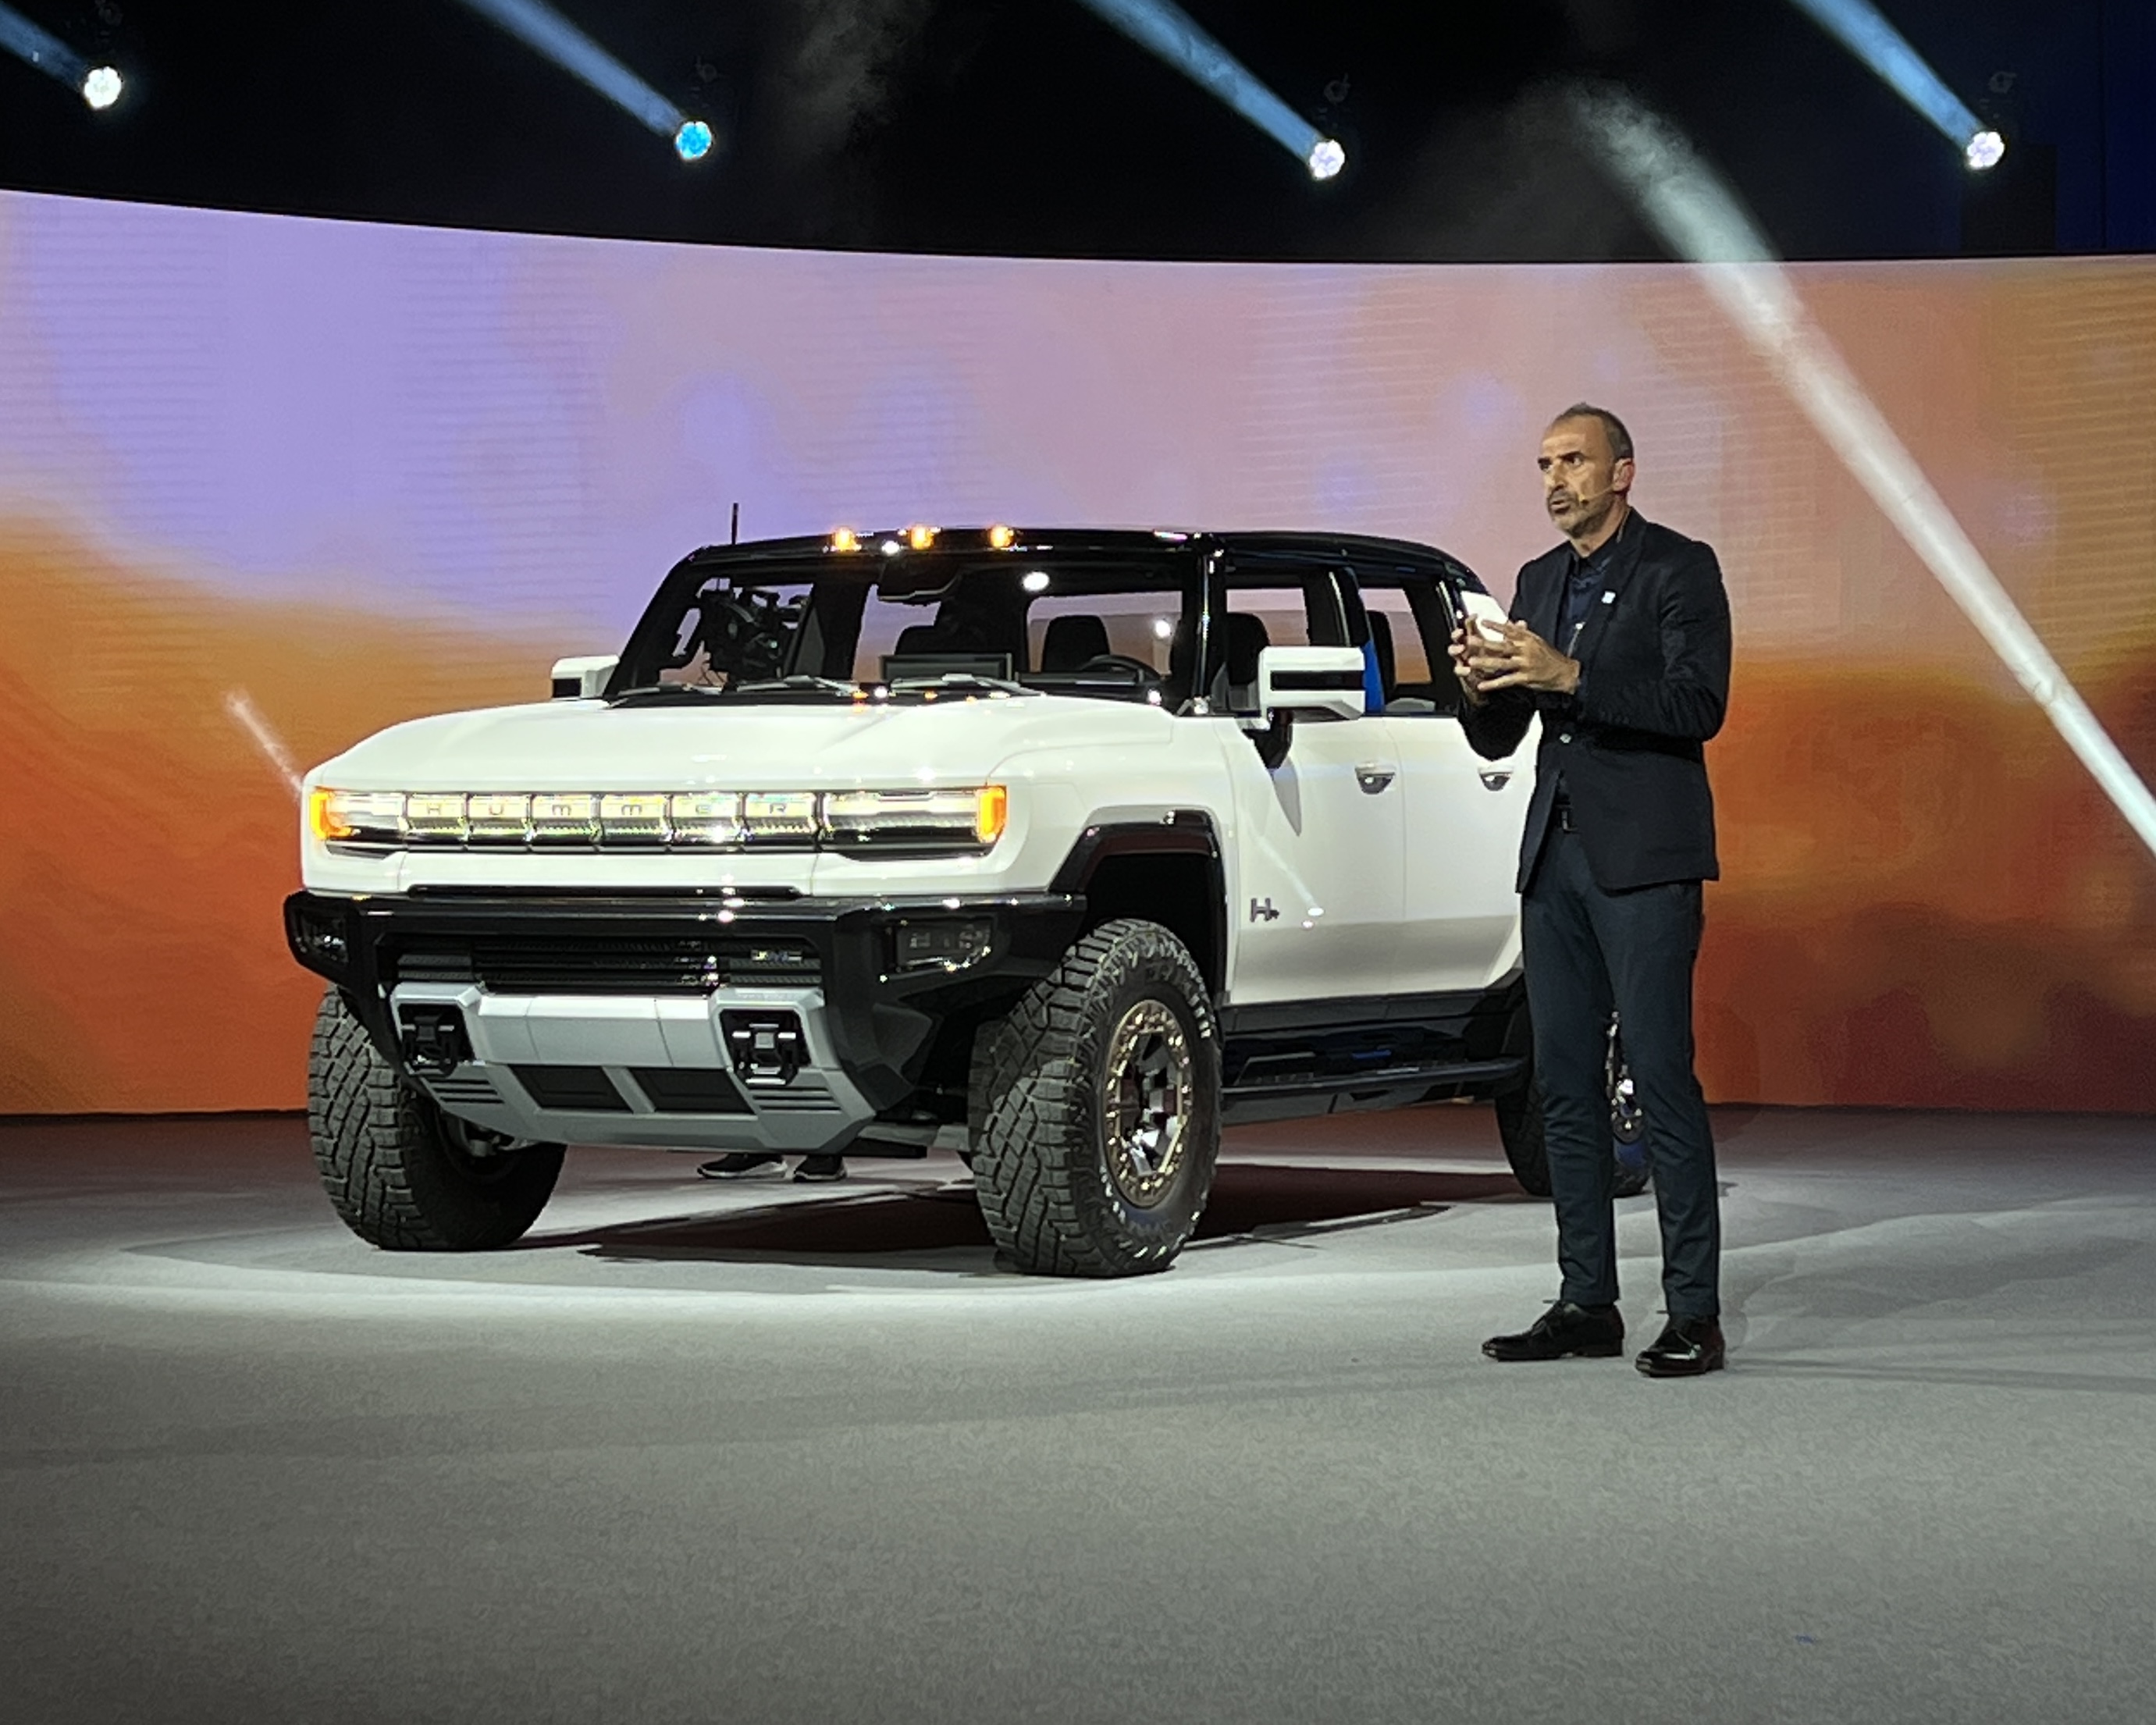 GM will bring 13 new EVs, including the Hummer EV, to the Middle East